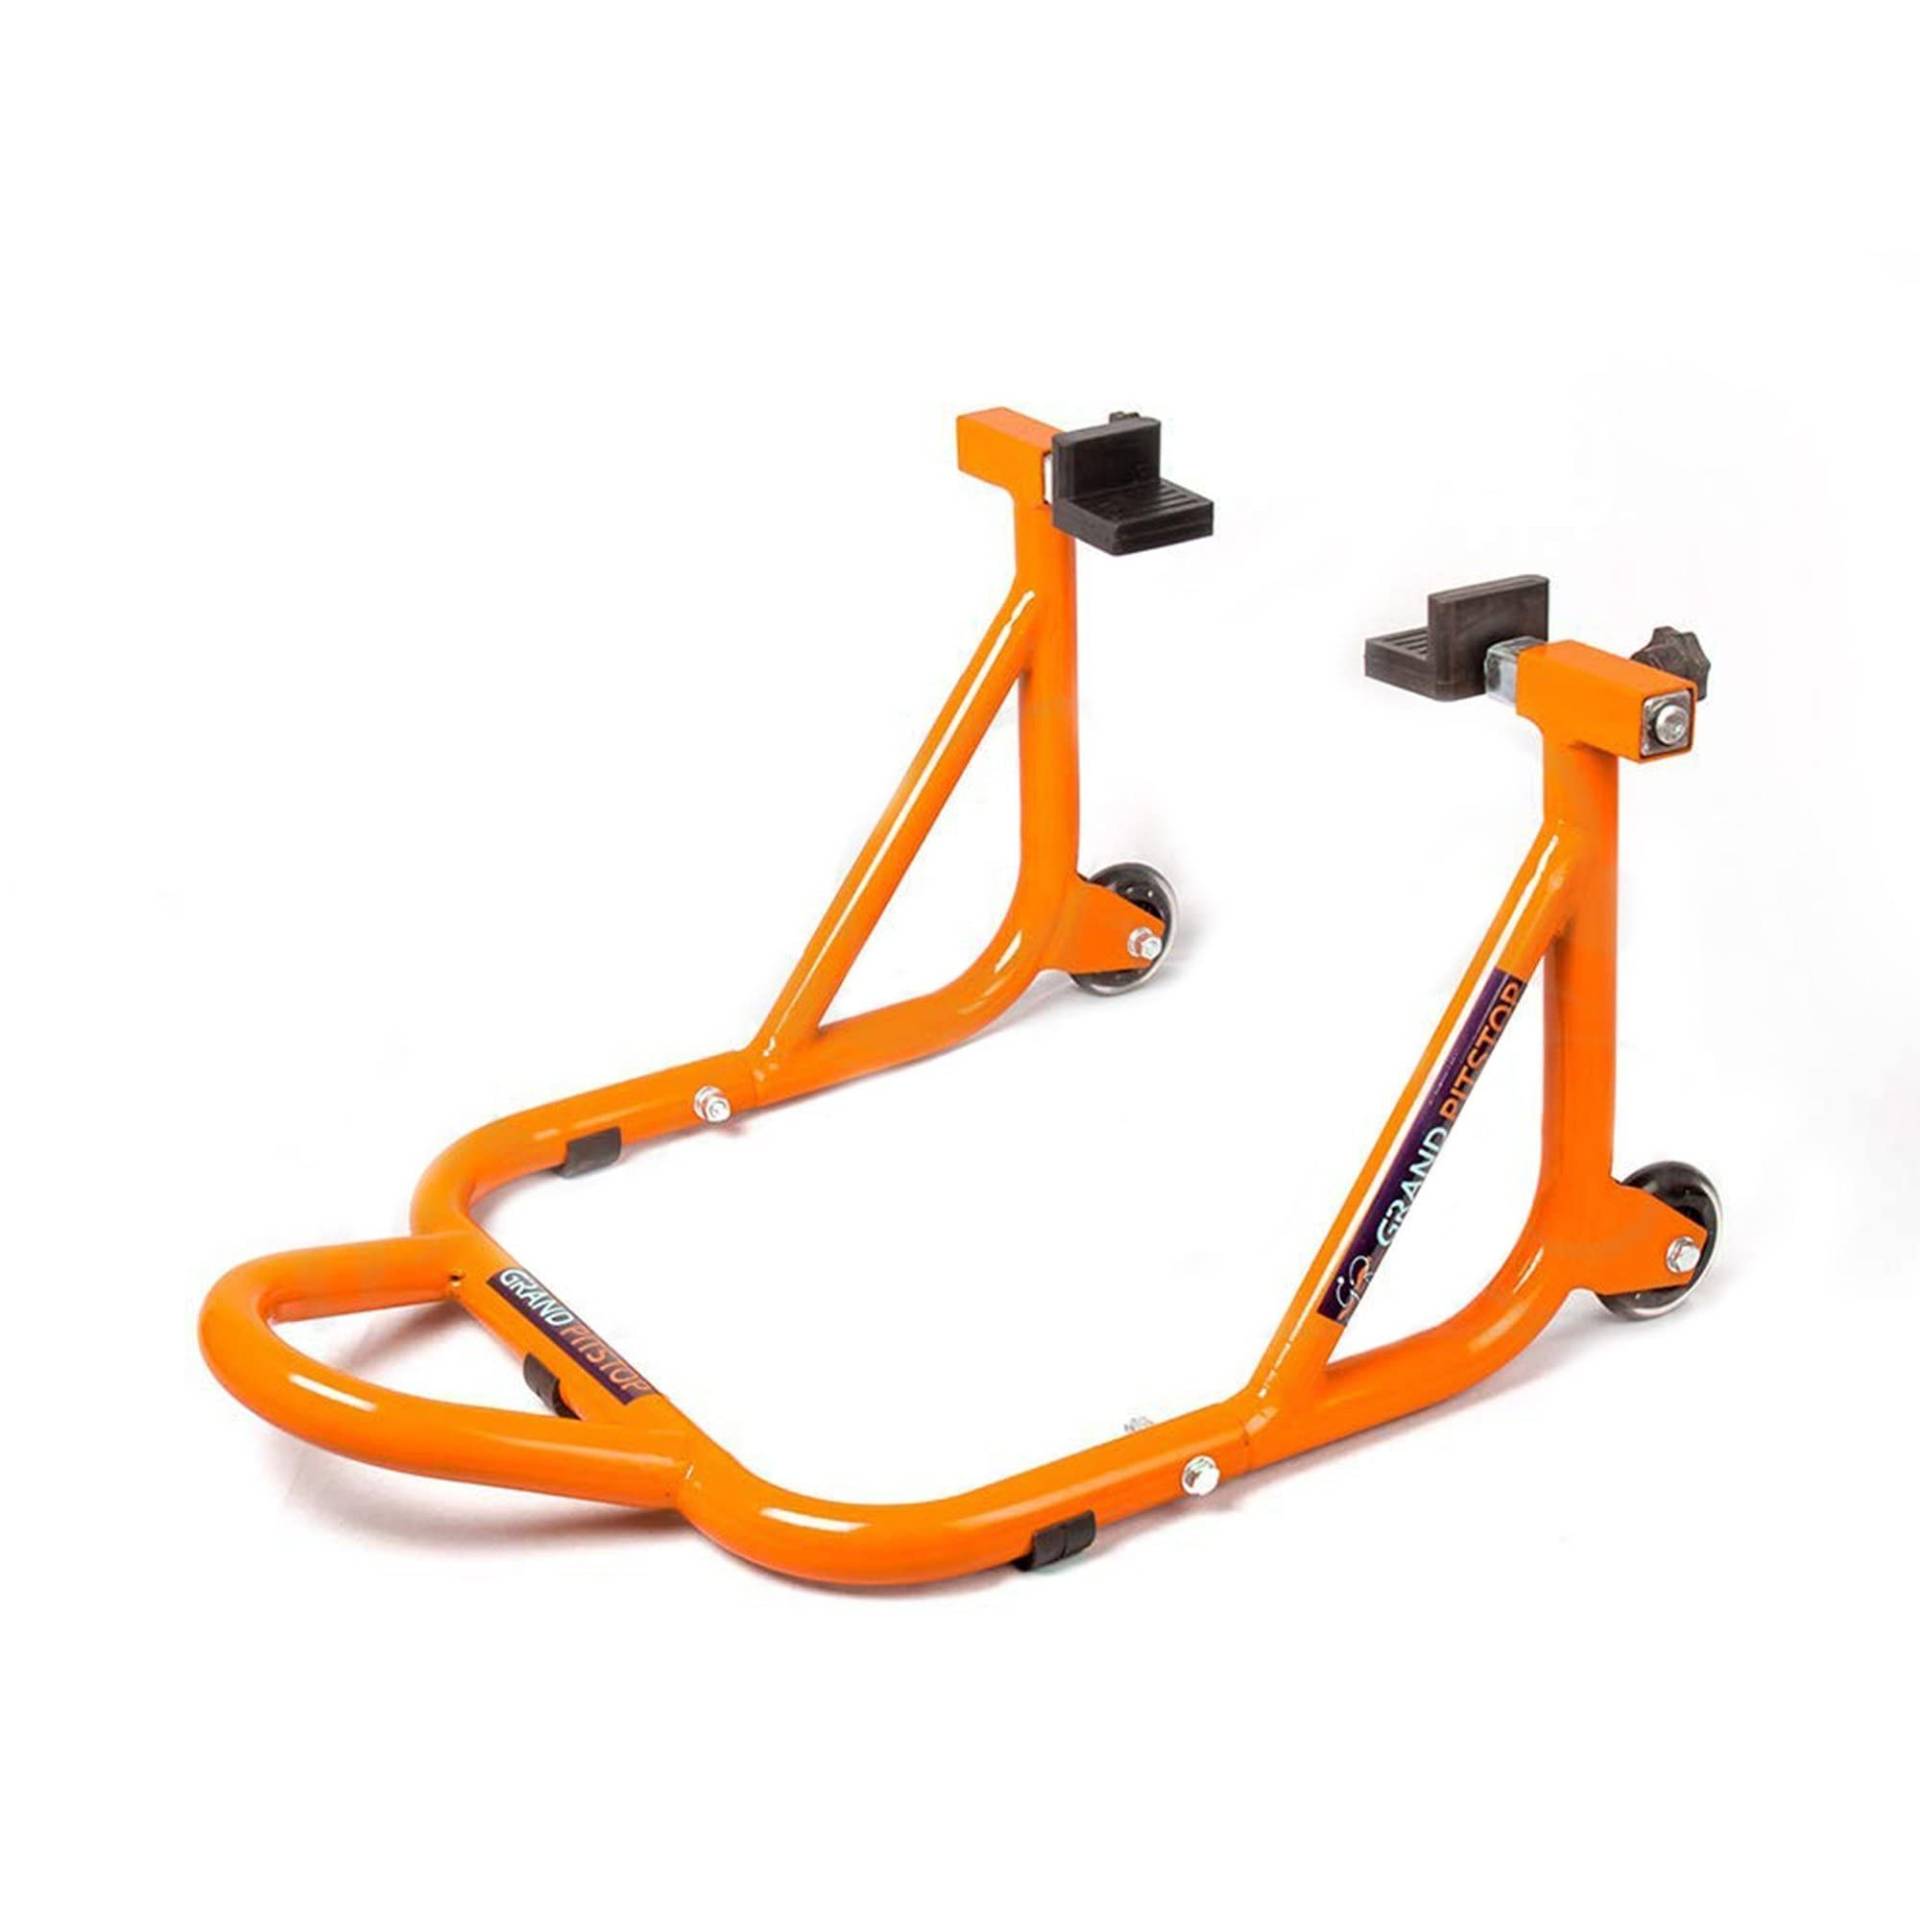 Grand Pitstop Universal Rear Paddock Stand for Motorcycle with Swingarm Rest (Dismantable with Skate Wheels, Orange, Motorcycle Weight Up to 450 Kgs) von GRAND PITSTOP